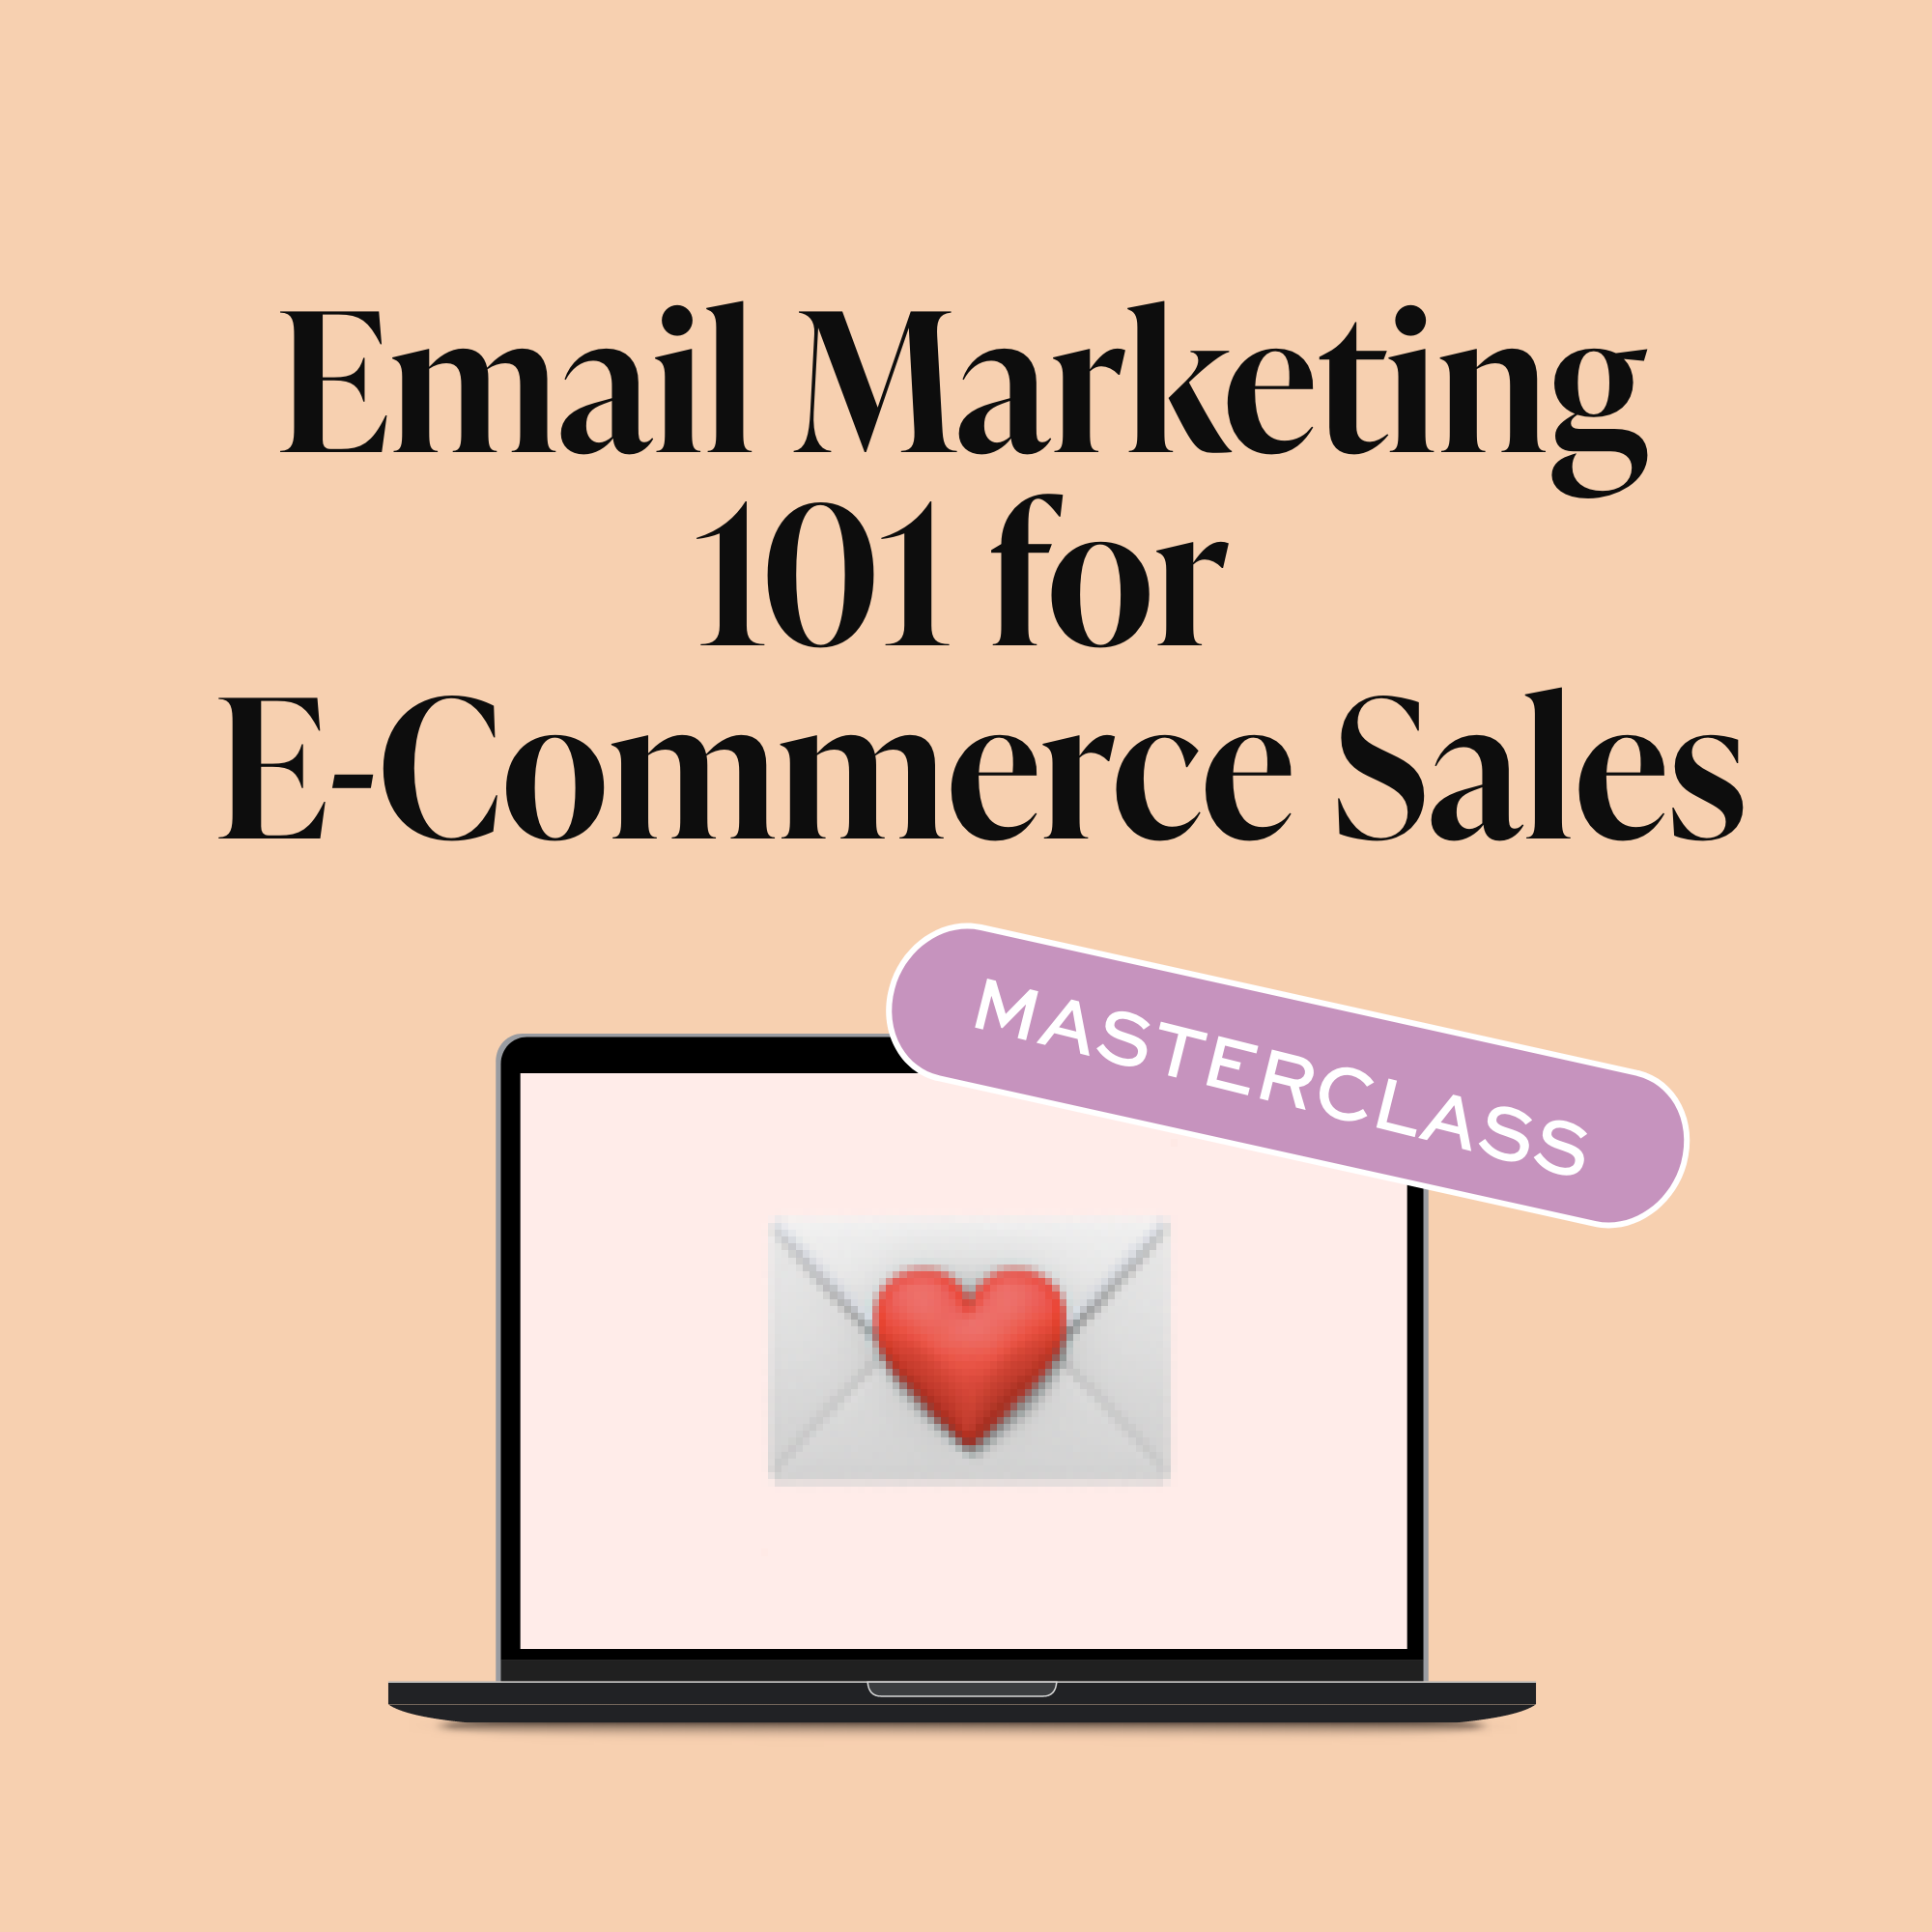 email marketing 101 for ecommerce sales